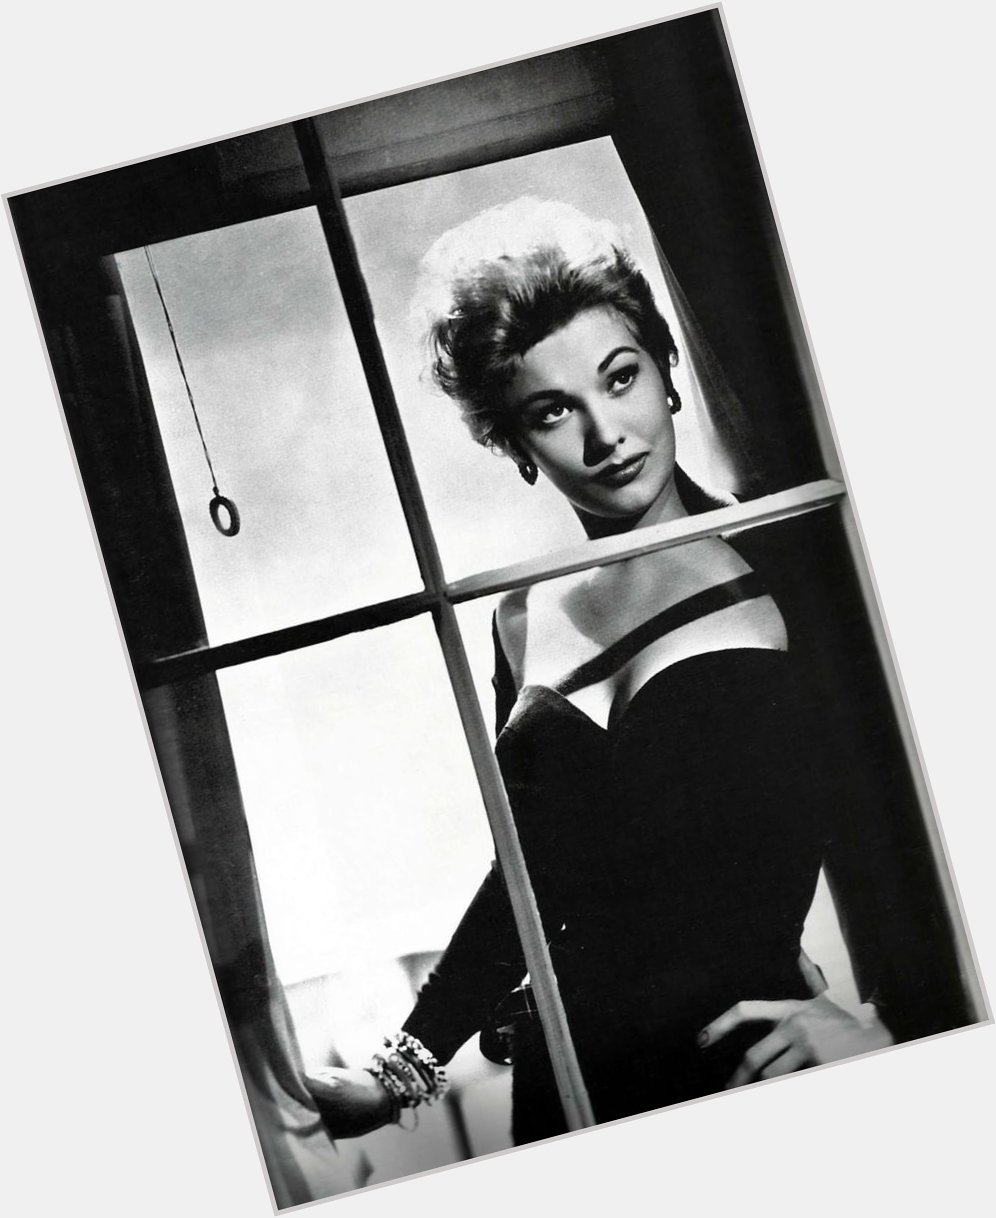  the great Kim Novak seen here from Pushover (1954). Happy Birthday!!! 